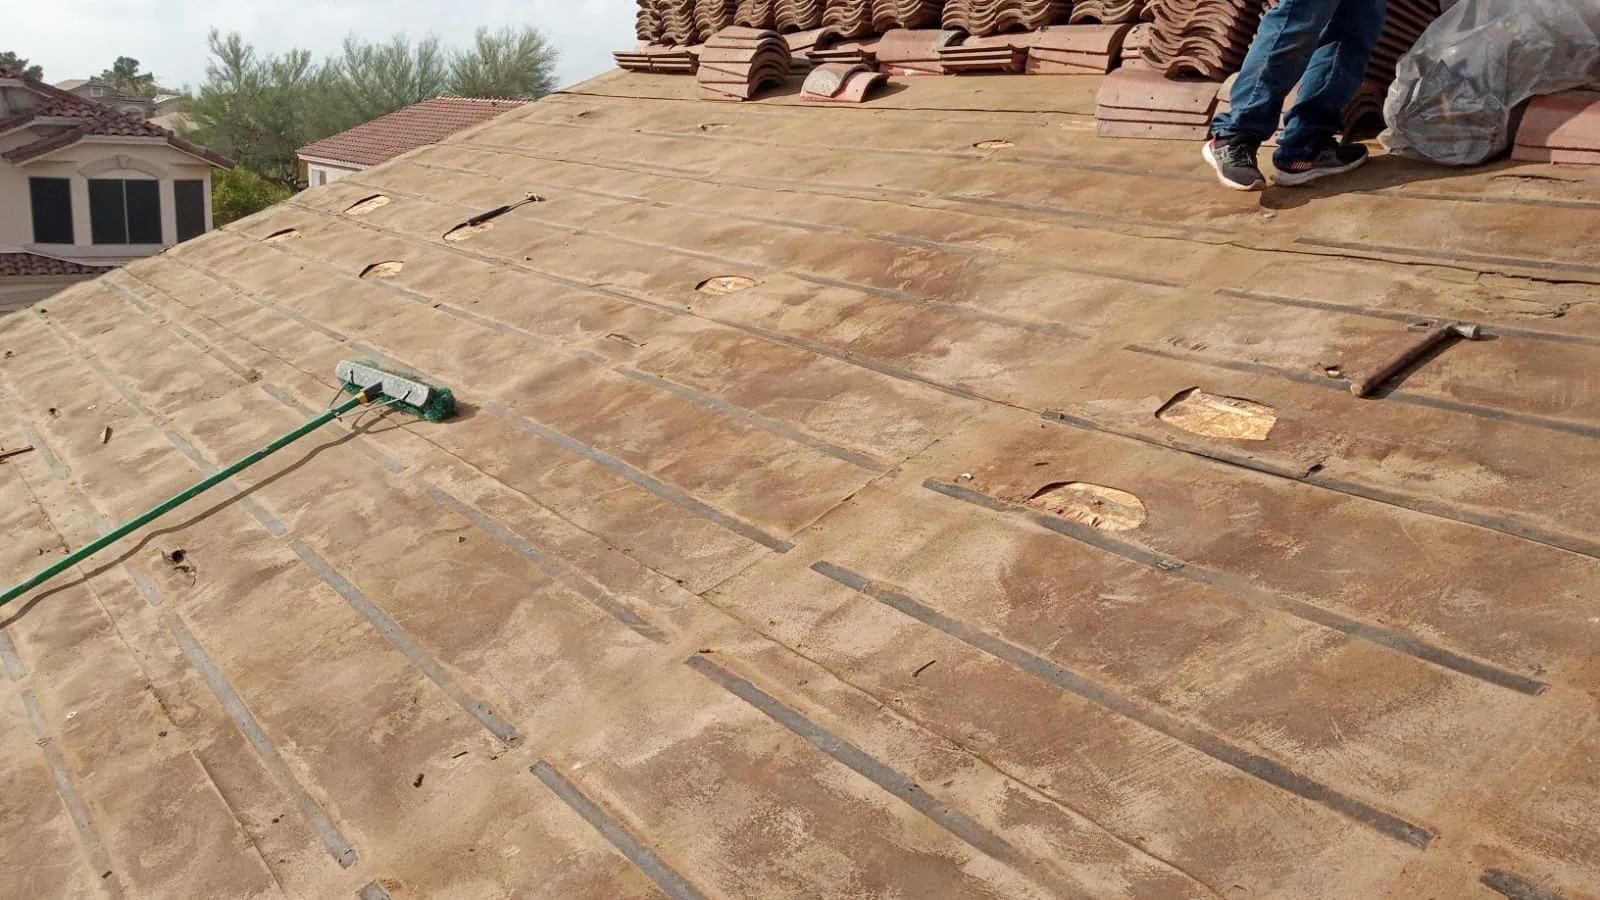 roof being replaced quality work from behmer scottsdale